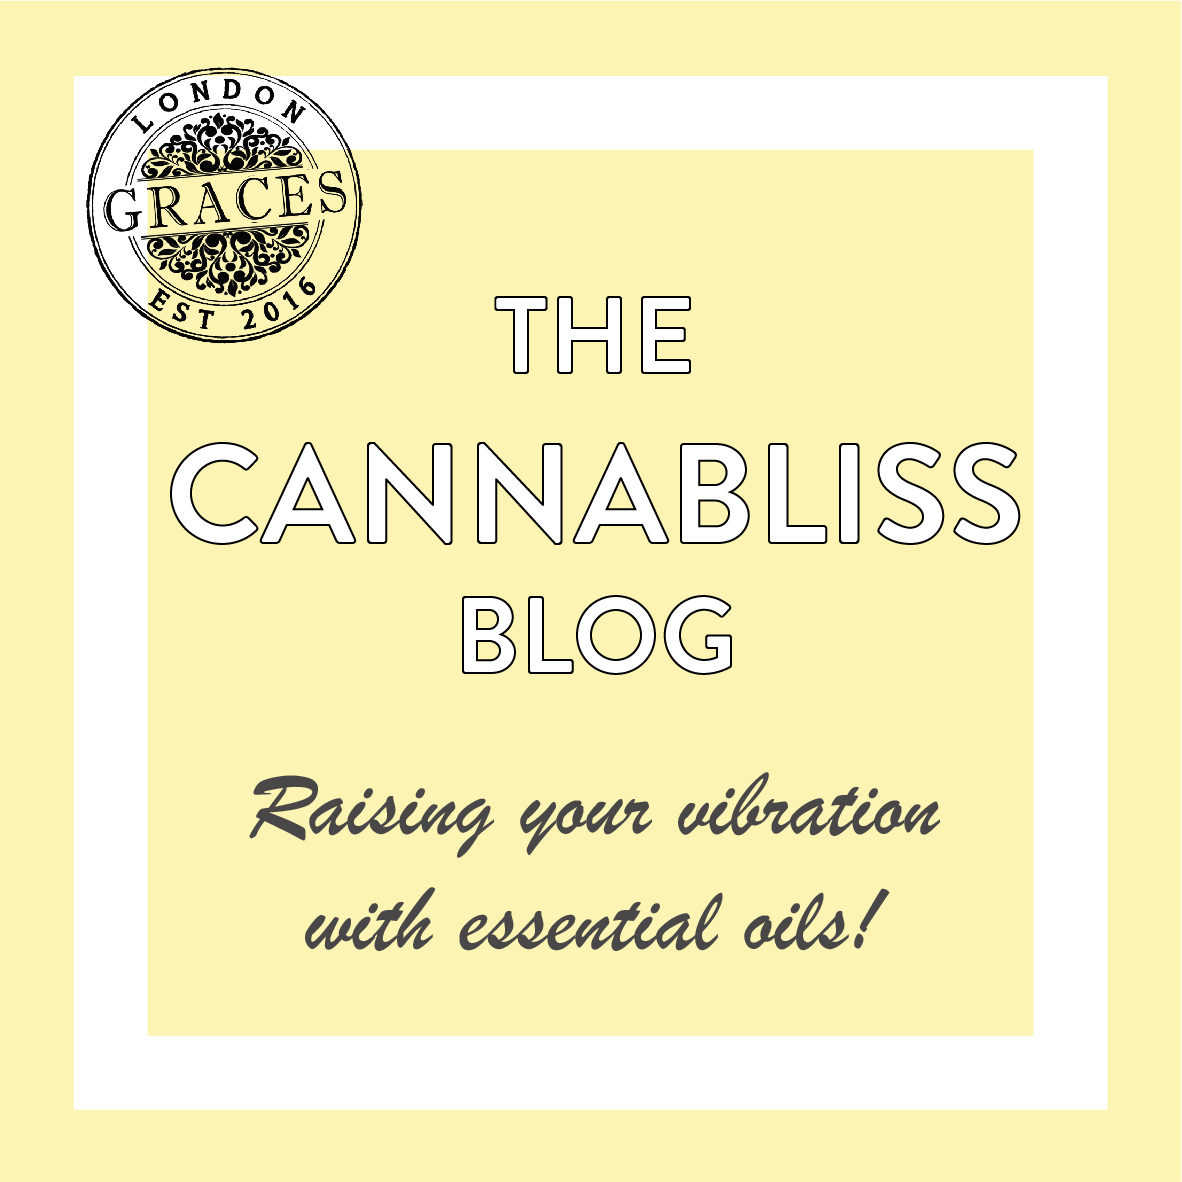 Cannabliss - Raising your vibration with essential oils